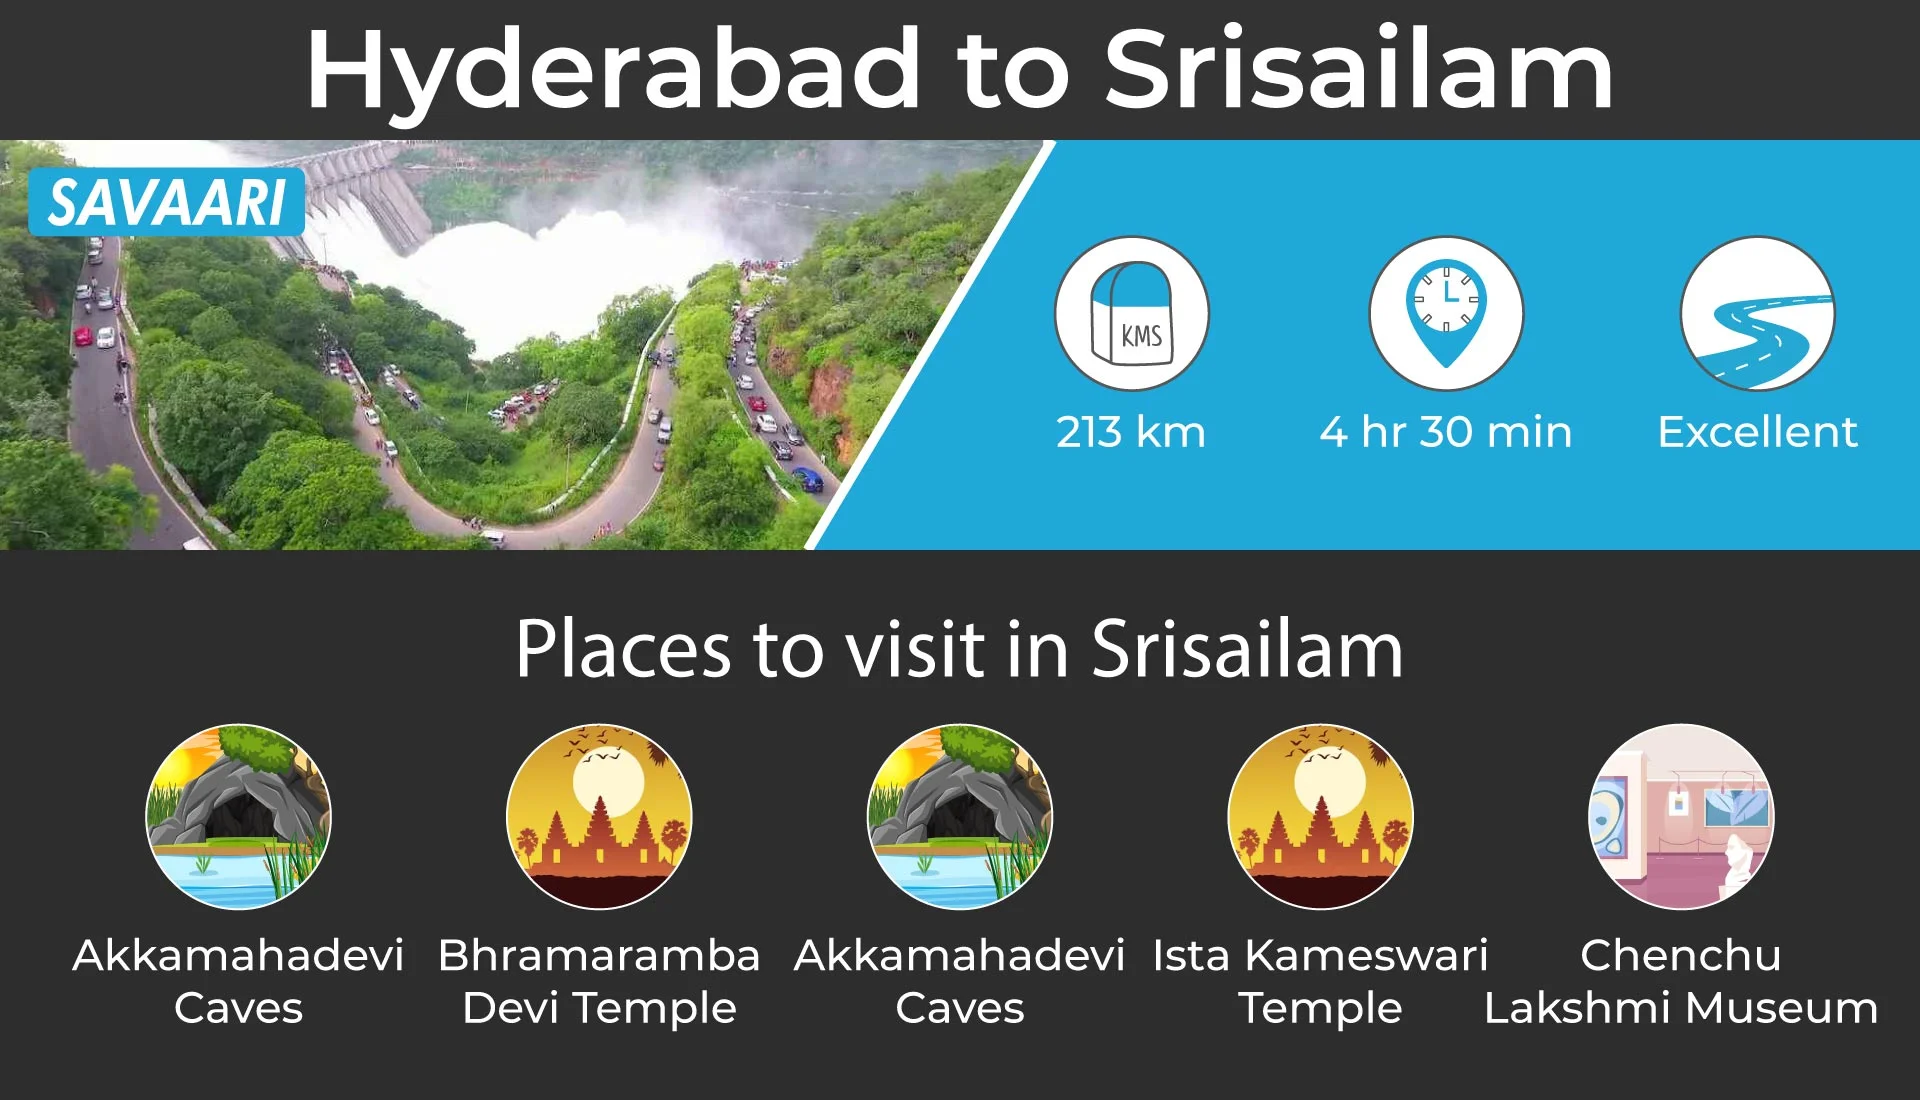 Hyderabad to Srisailam a scenic beauty 